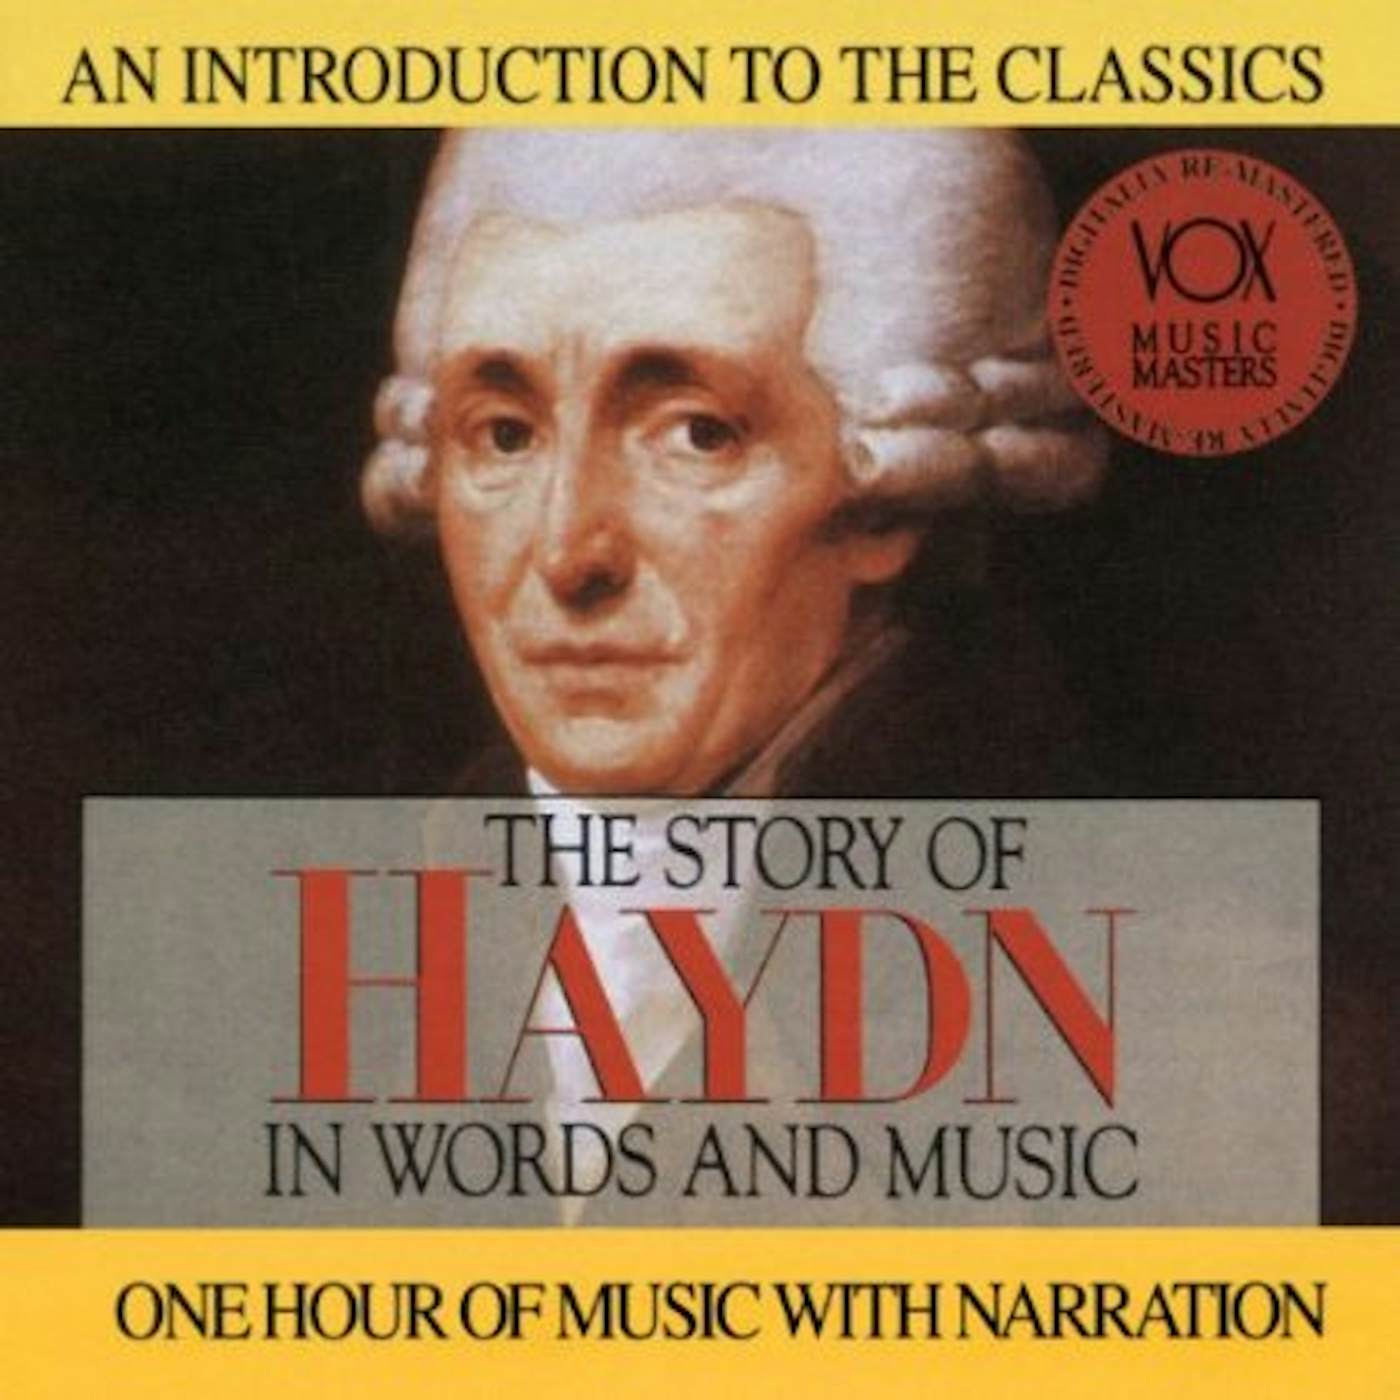 Haydn HIS STORY & HIS MUSIC CD